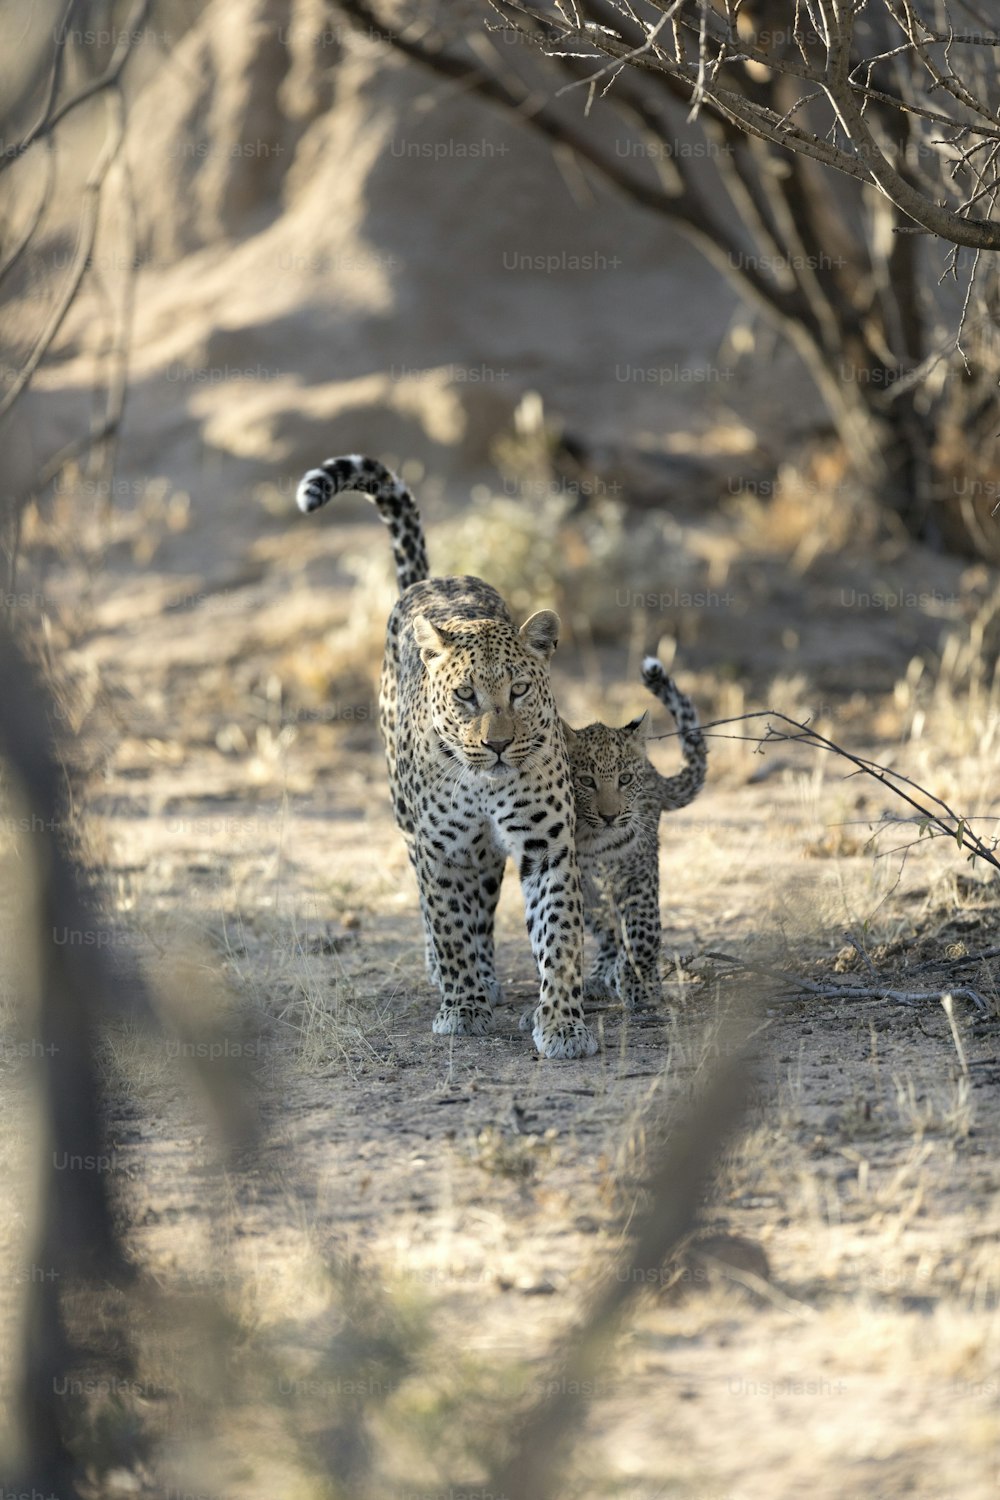 Mother and her cub leopard walking in Etosha National Park, Namibia.